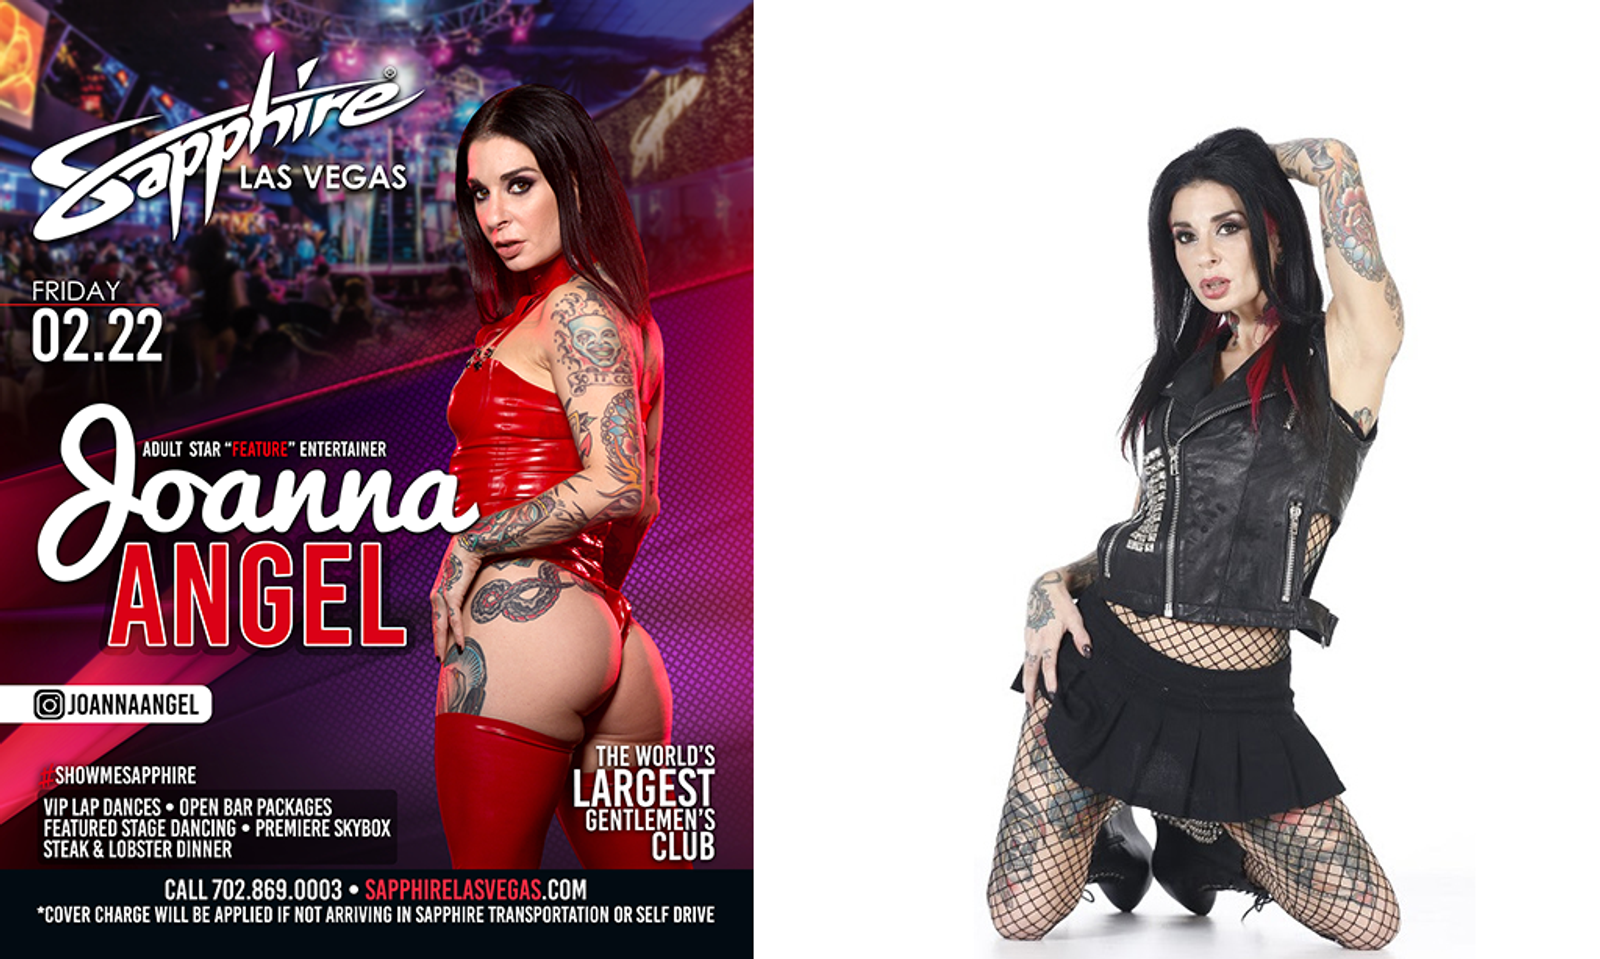 Joanna Angel to Take the Stage at Sapphire Las Vegas Tonight!